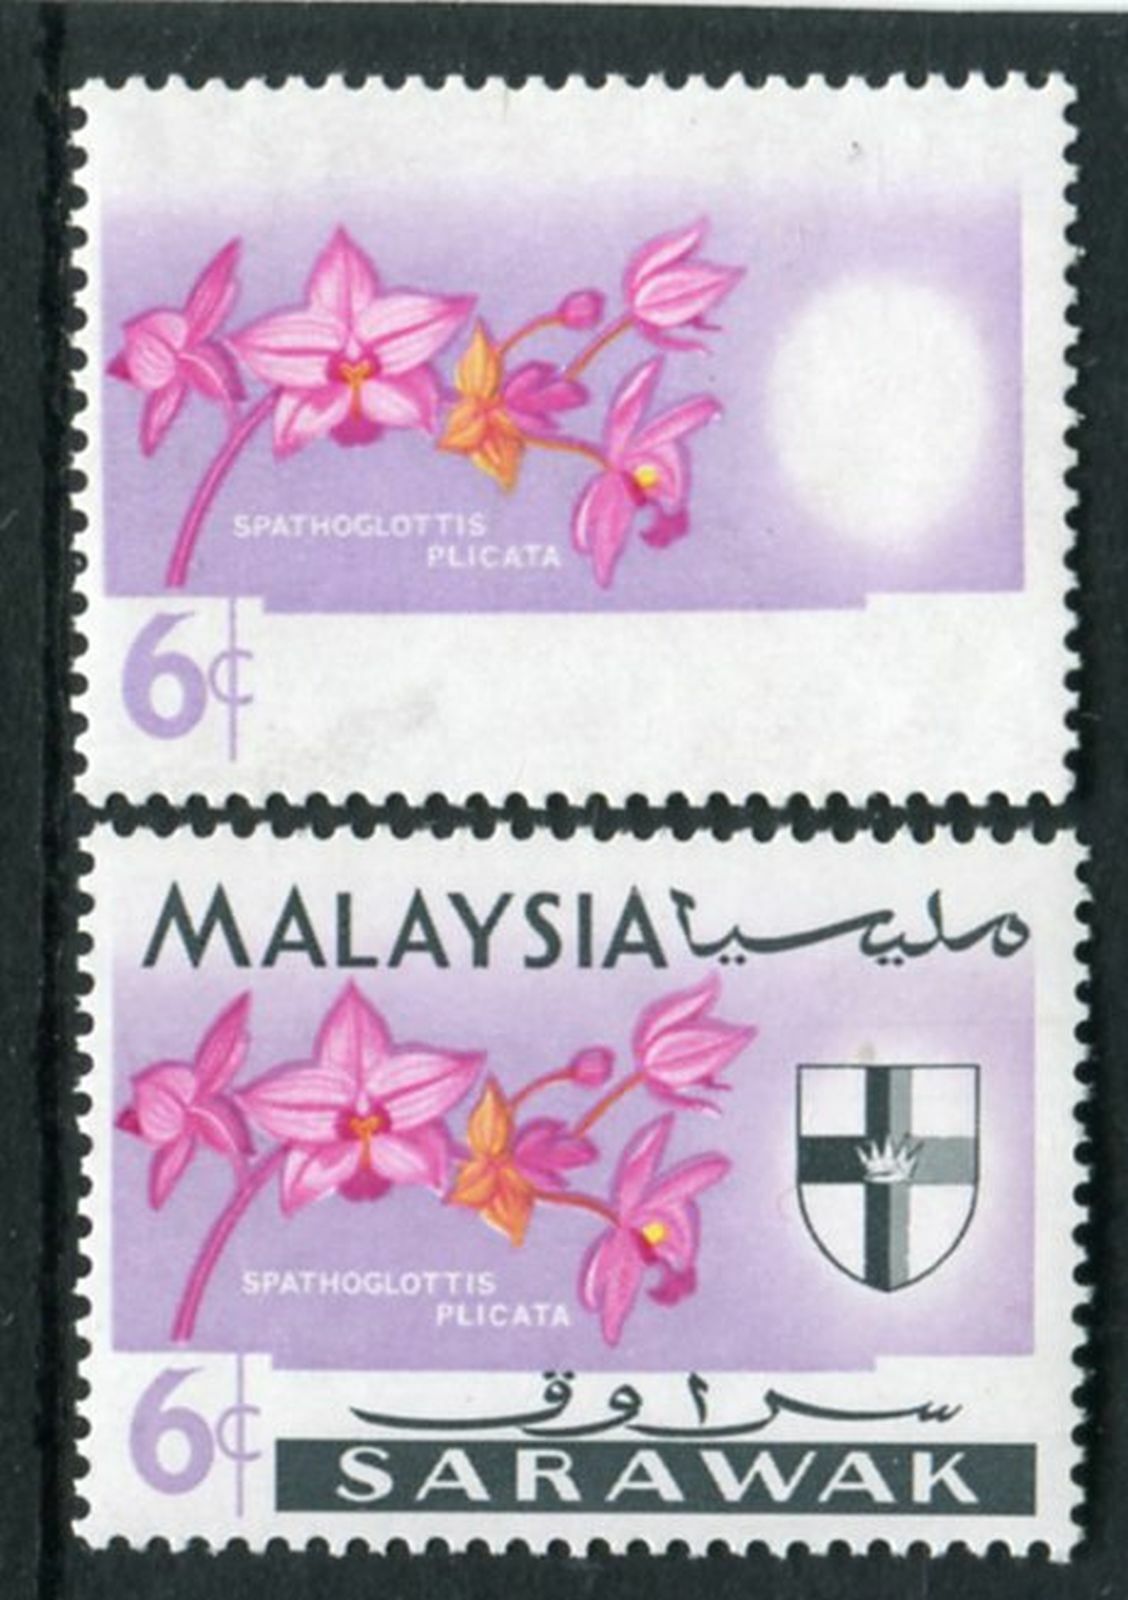 SARAWAK 1965 ORCHID 6c BLACK (COUNTRY NAME AND SHIELD) OMITTED S